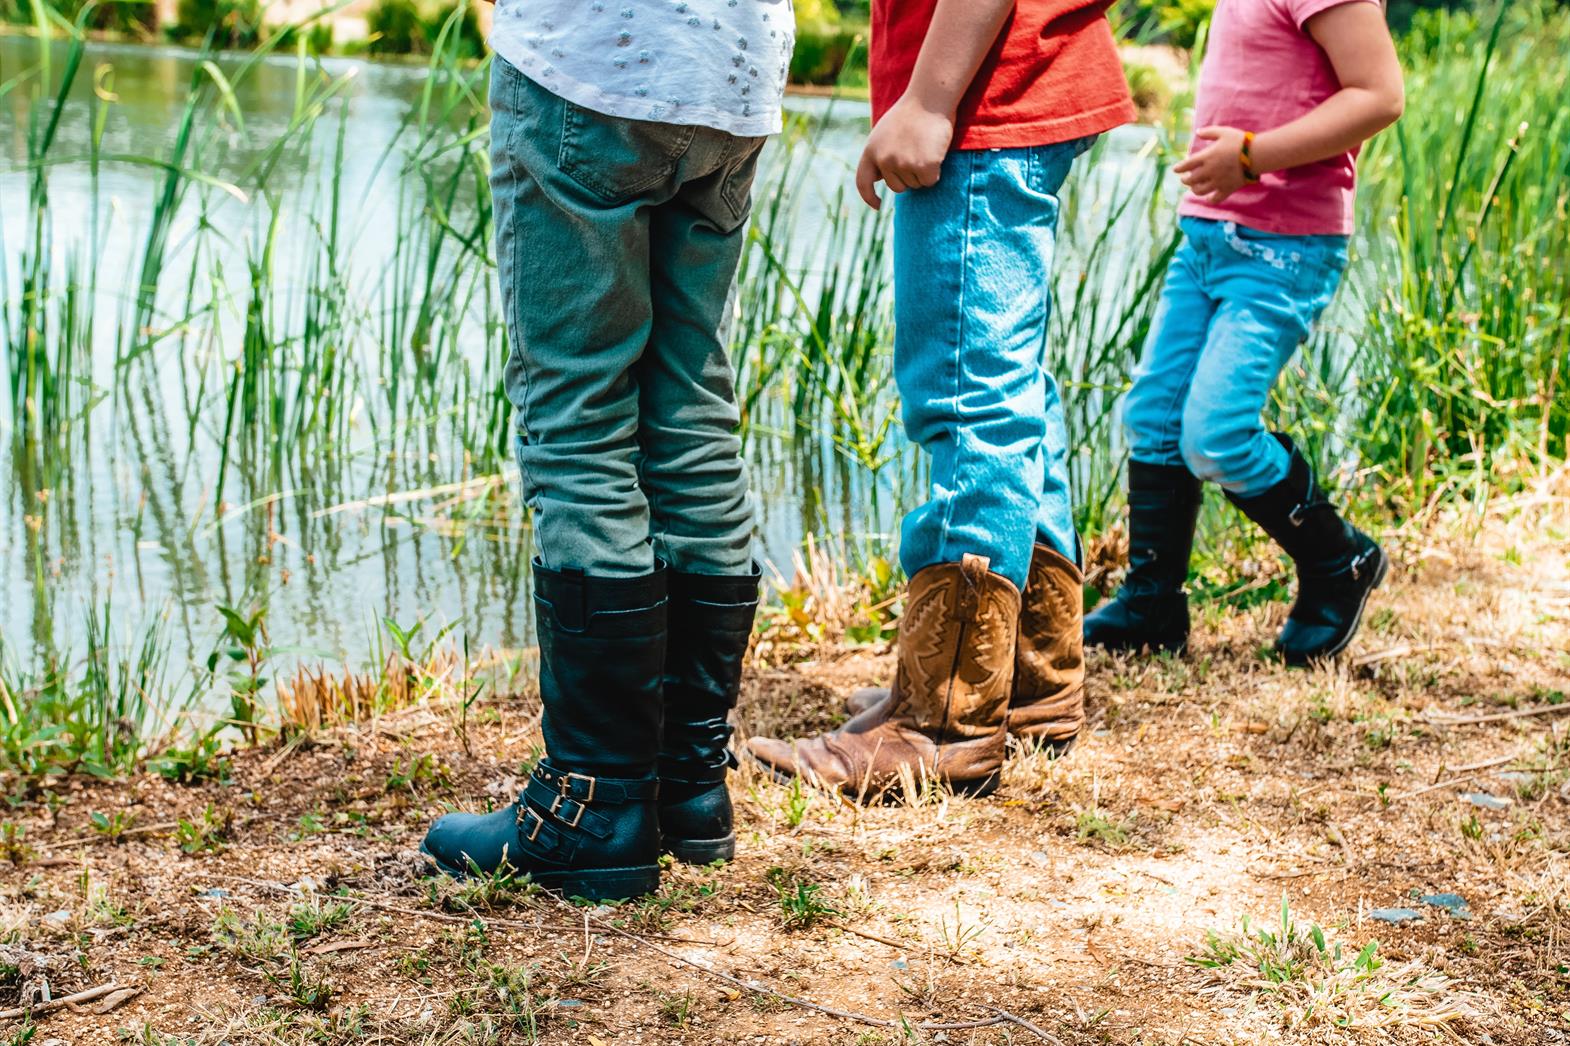 The legs of three children wearing boots and jeans and standing by a river